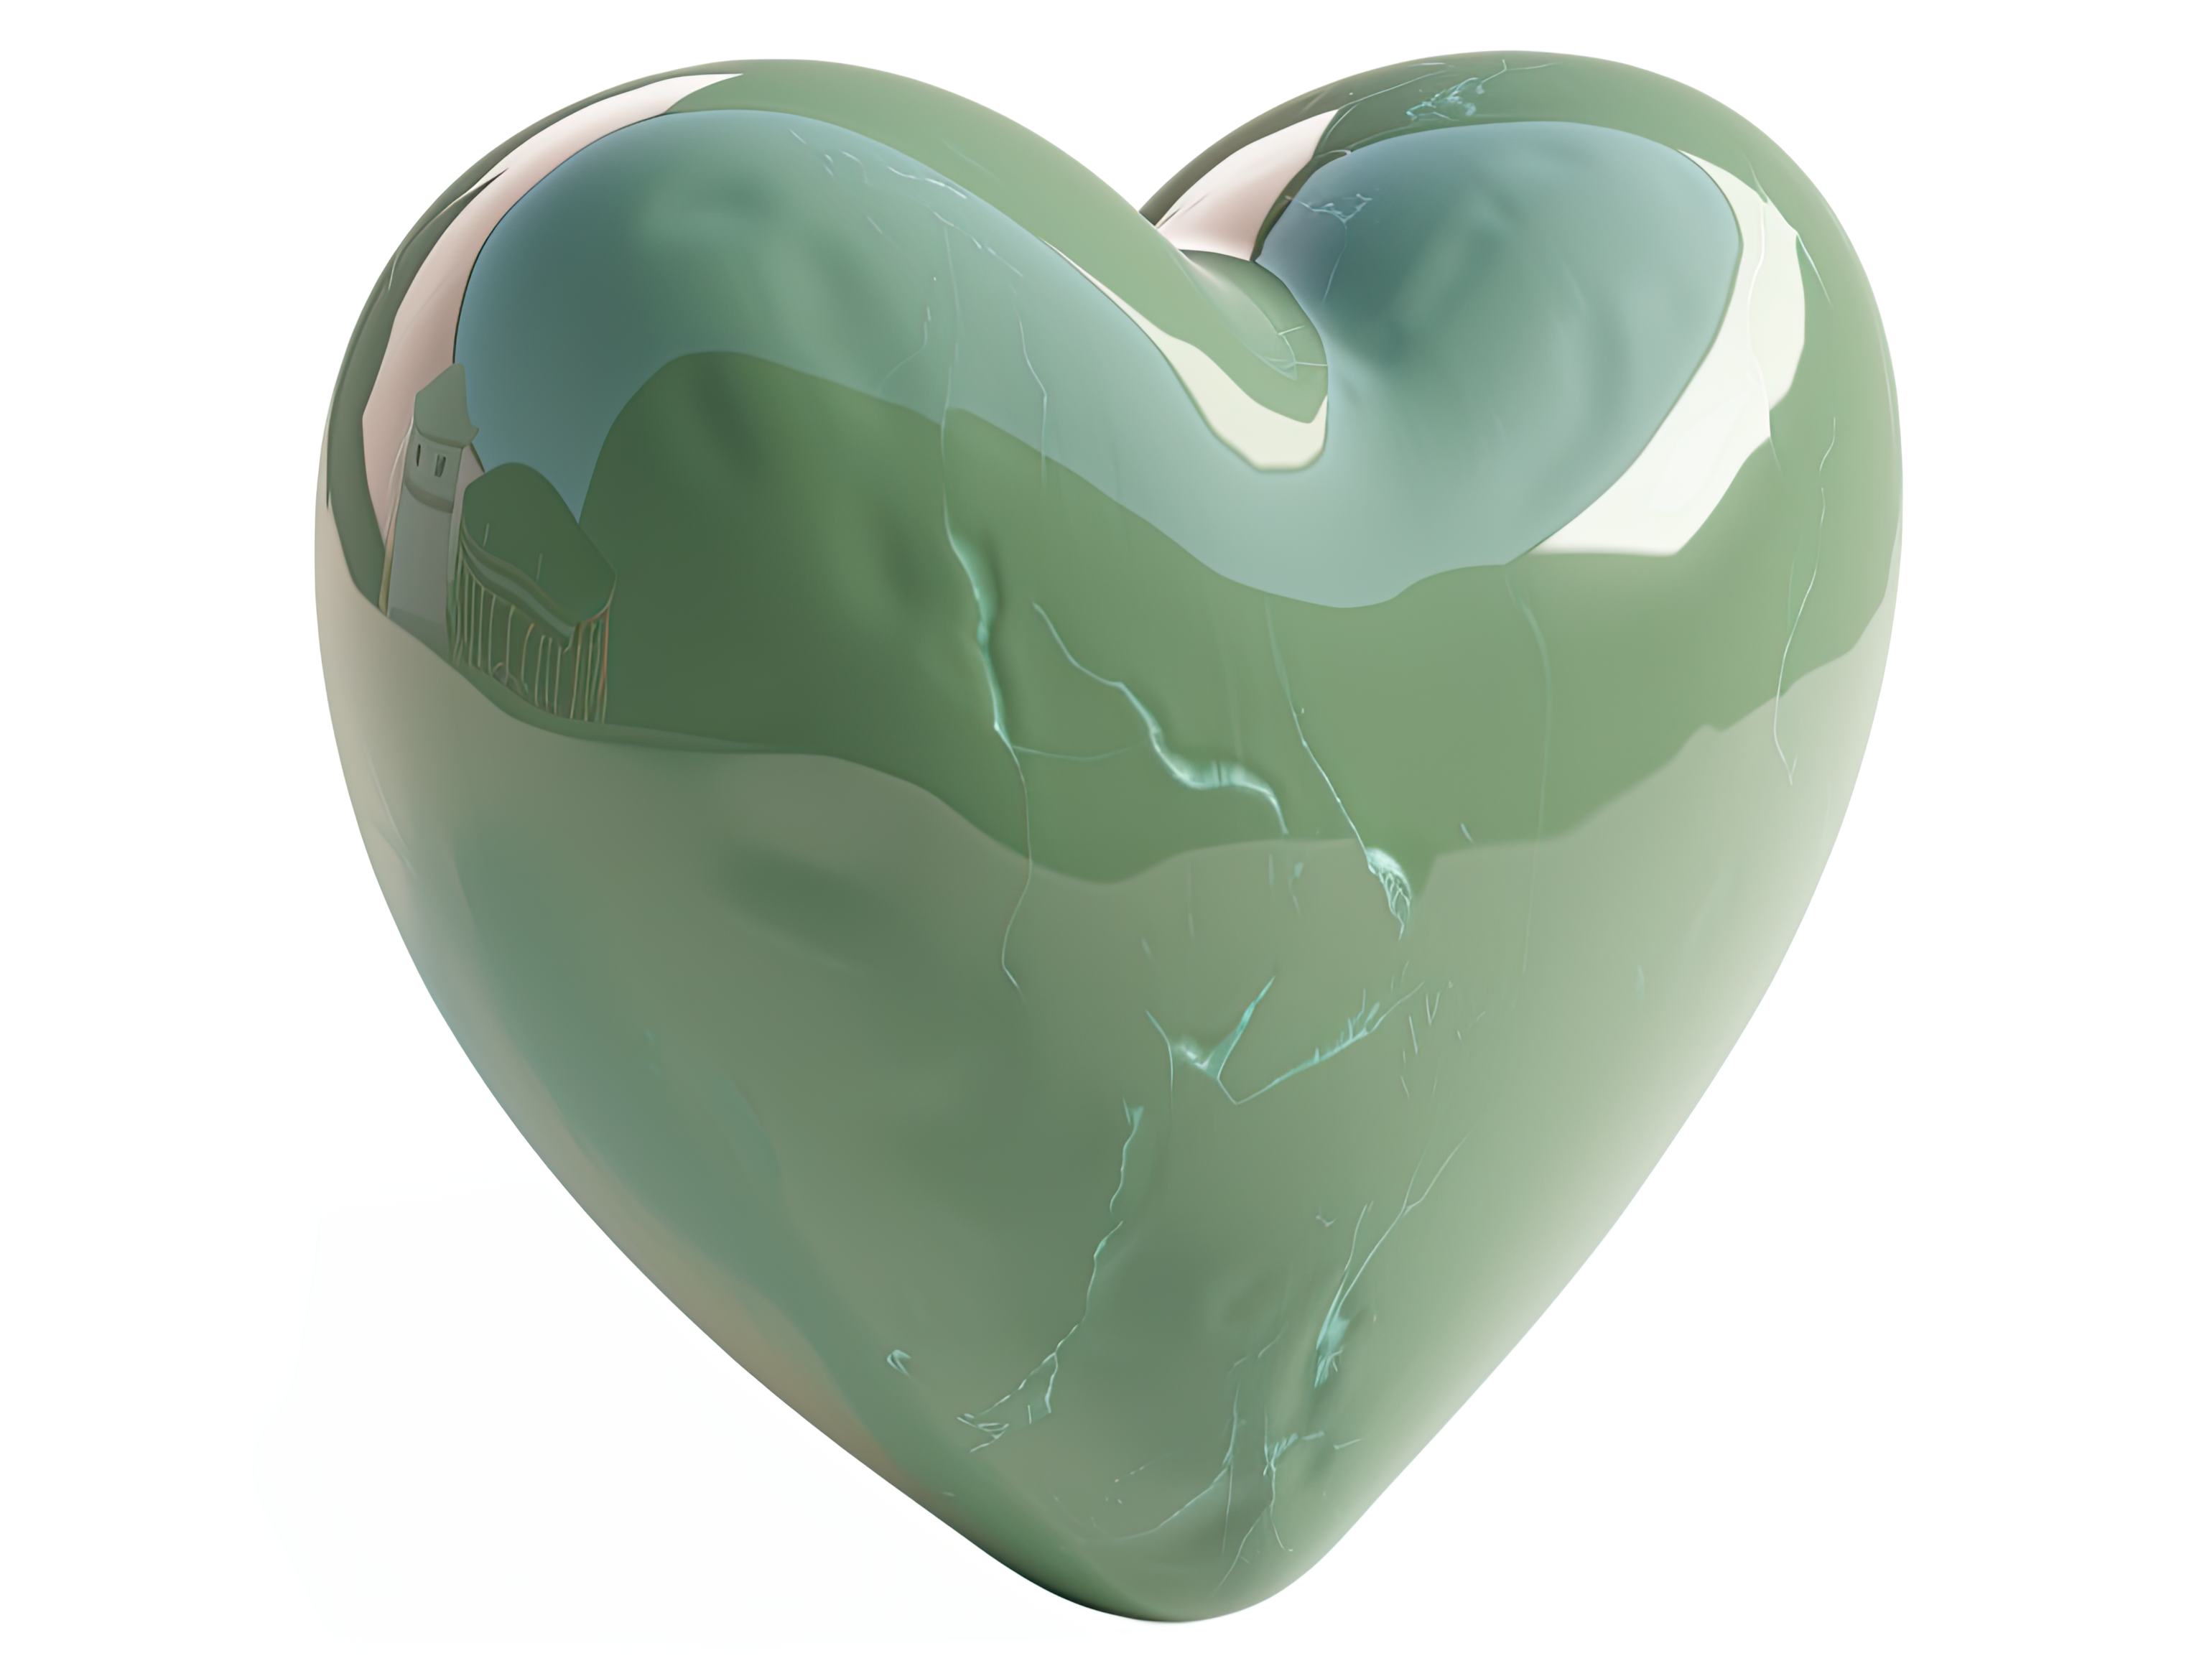 Green heart, Love, wedding, marriage ceremony and Valentine's Day romantic celebration 3d concept